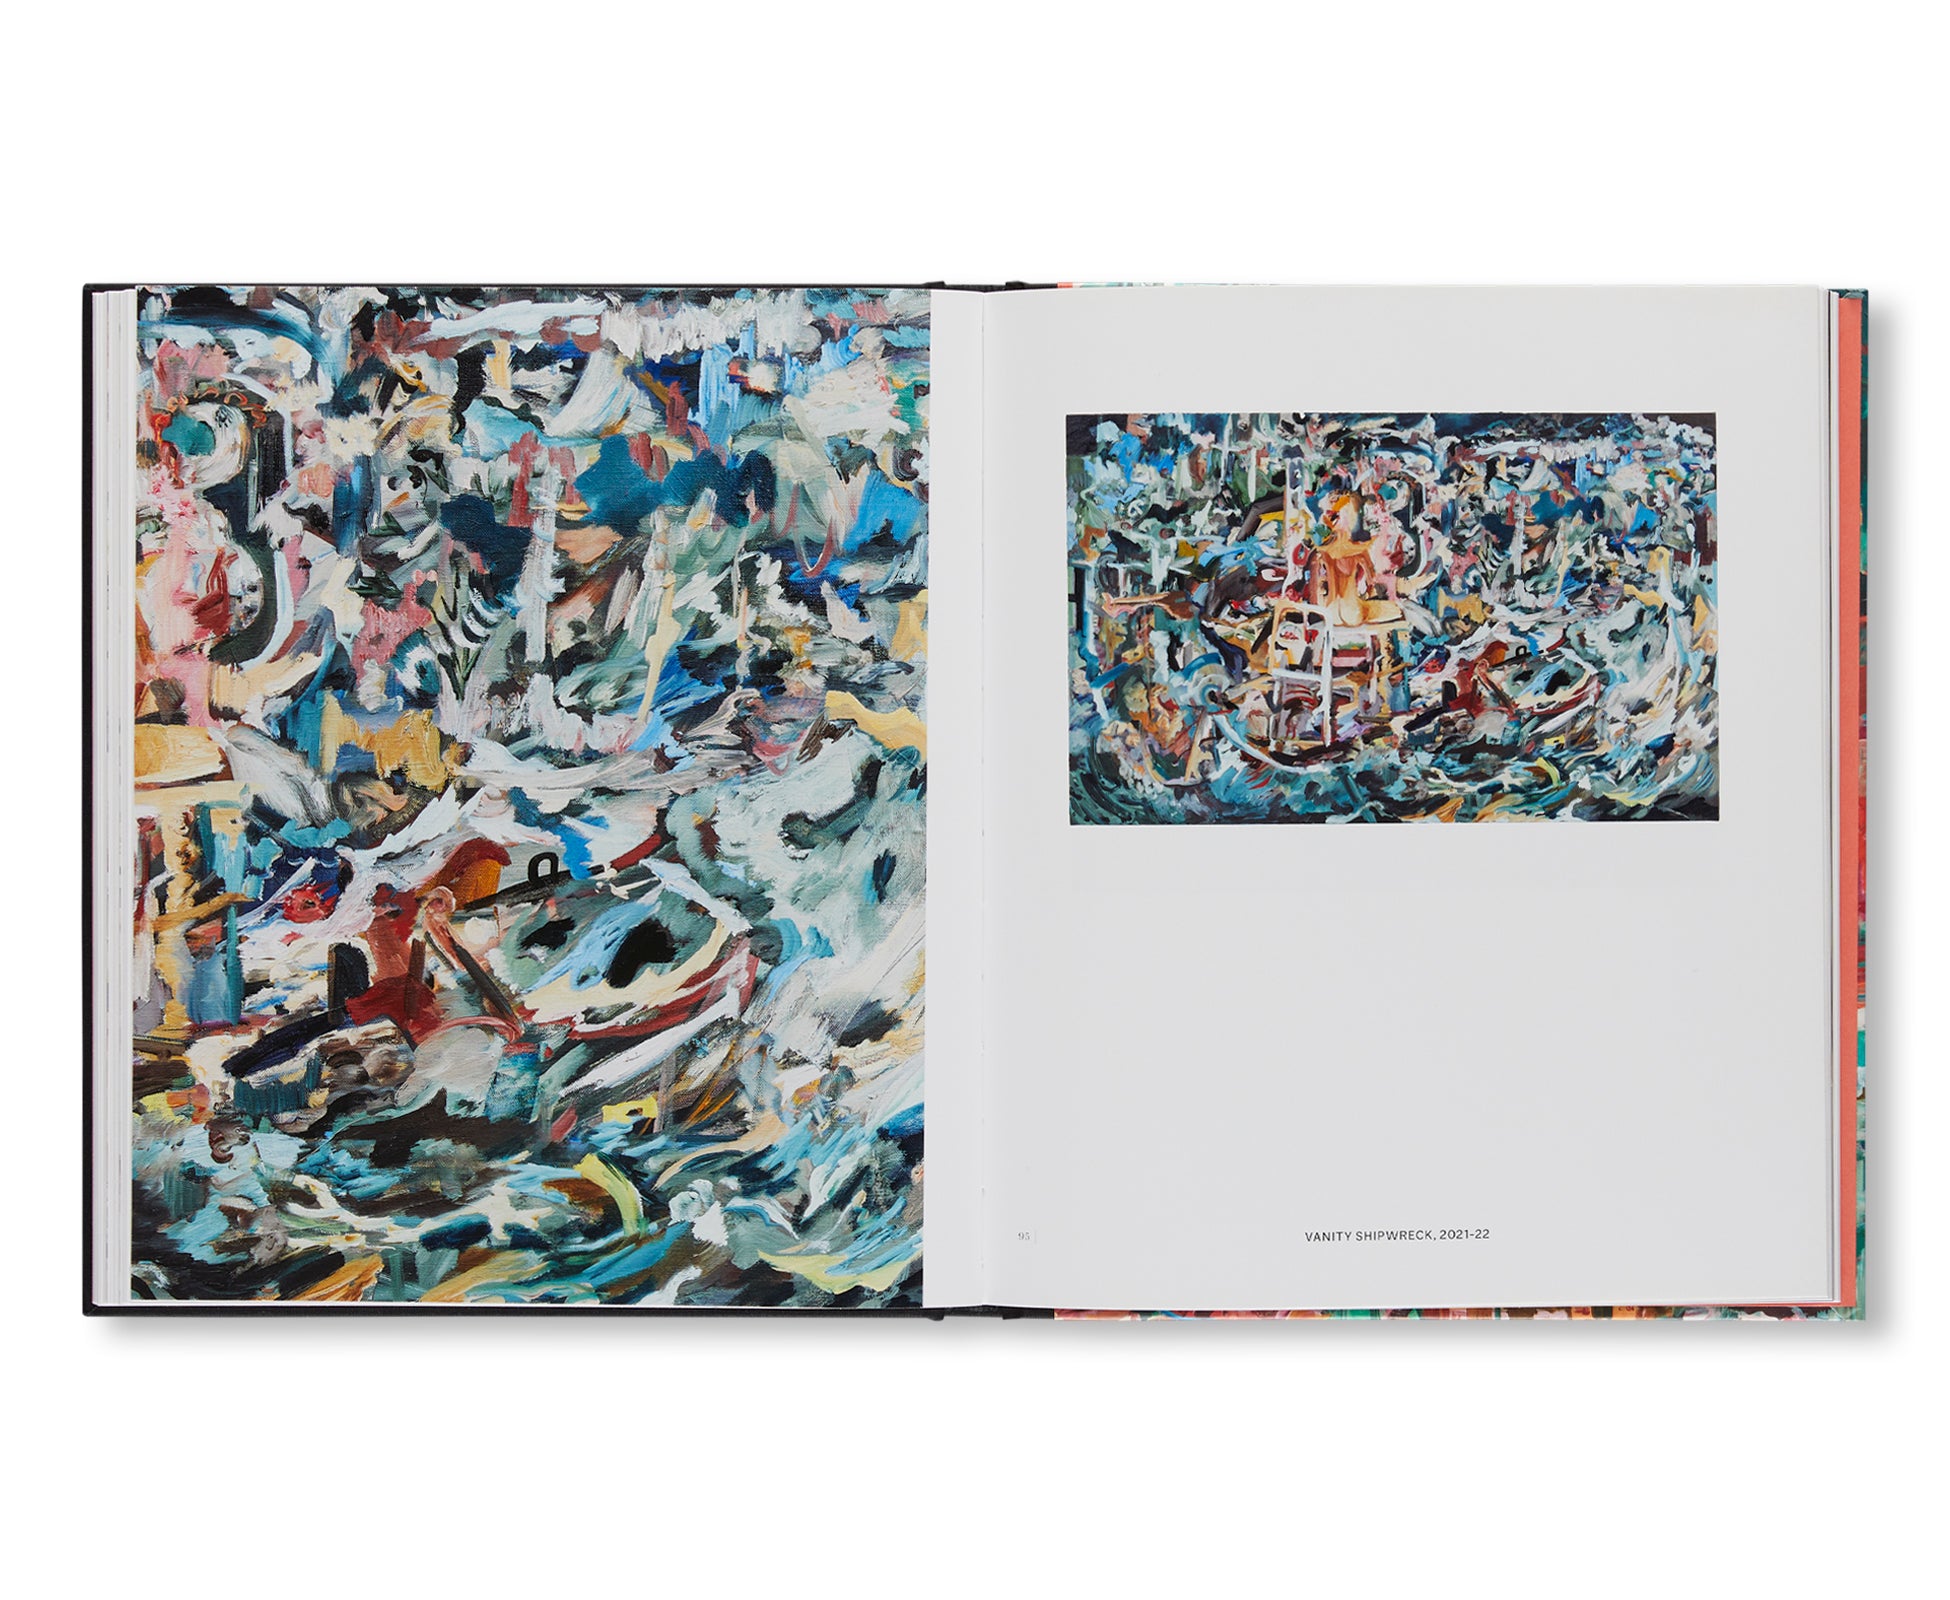 DEATH AND THE MAID by Cecily Brown